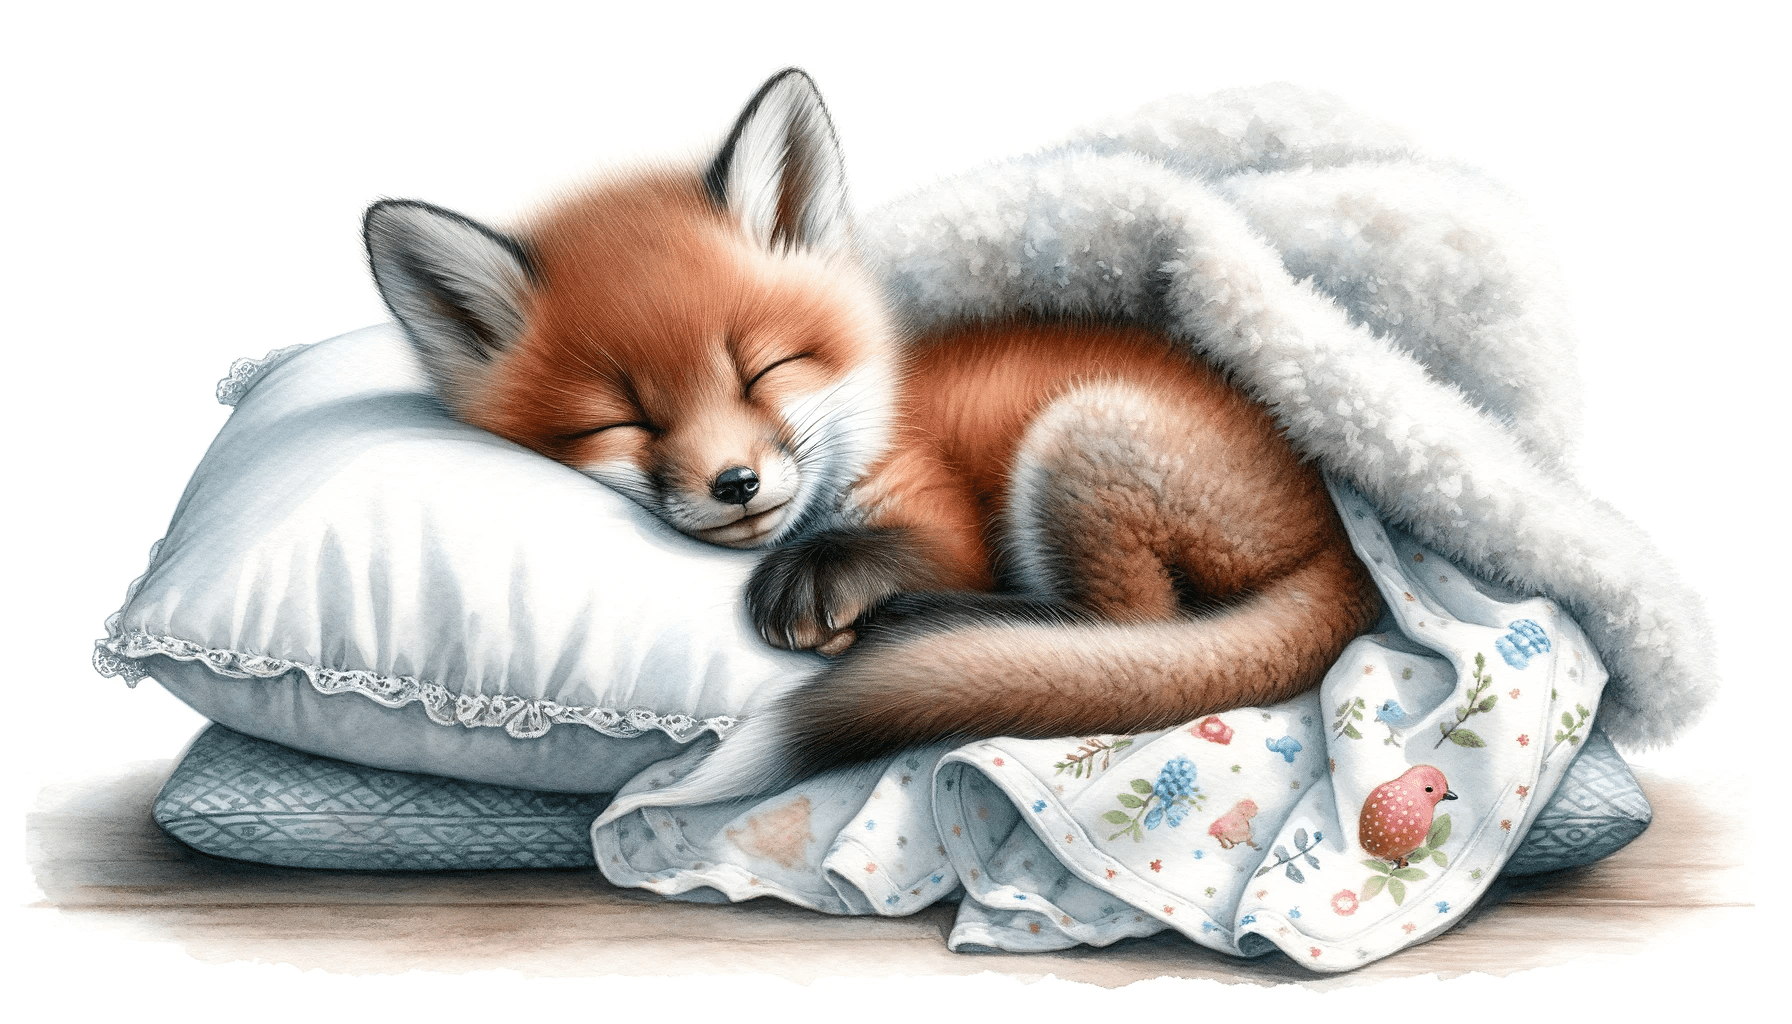 Baby Fox Sleeping on a pillow Watercolor Painting